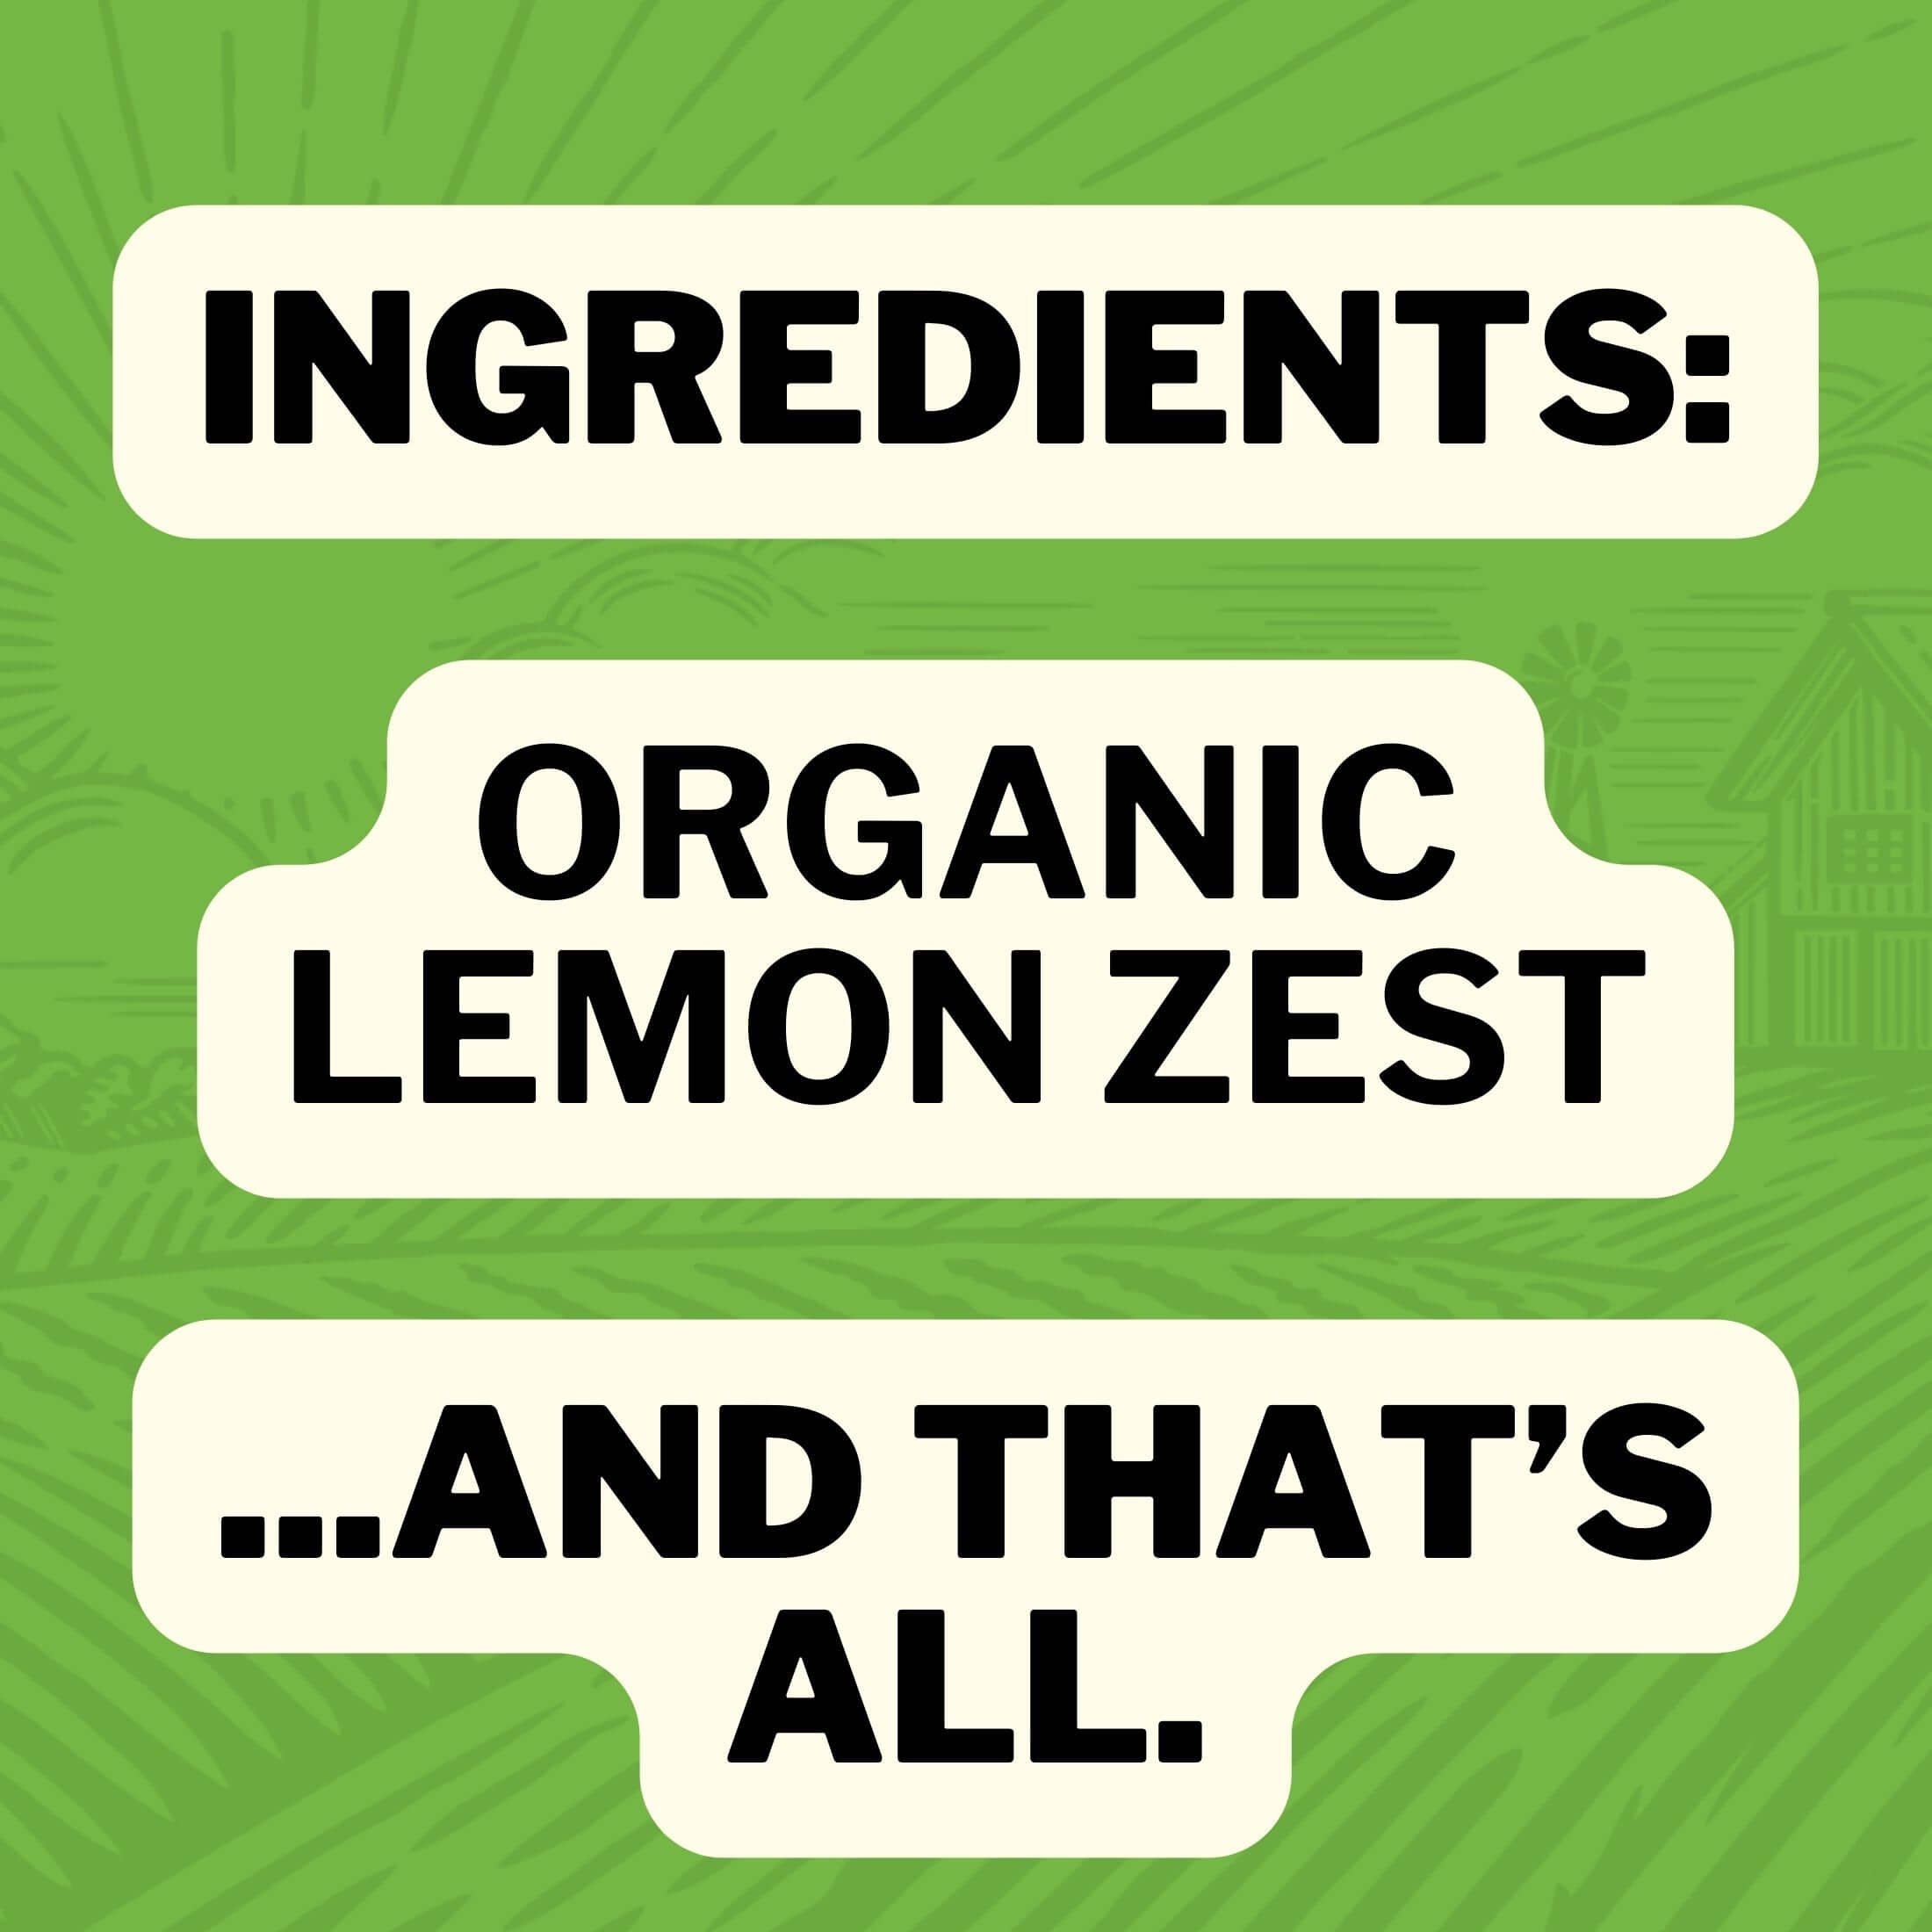 Ingredients: Organic Lemon Zest... And That's All.